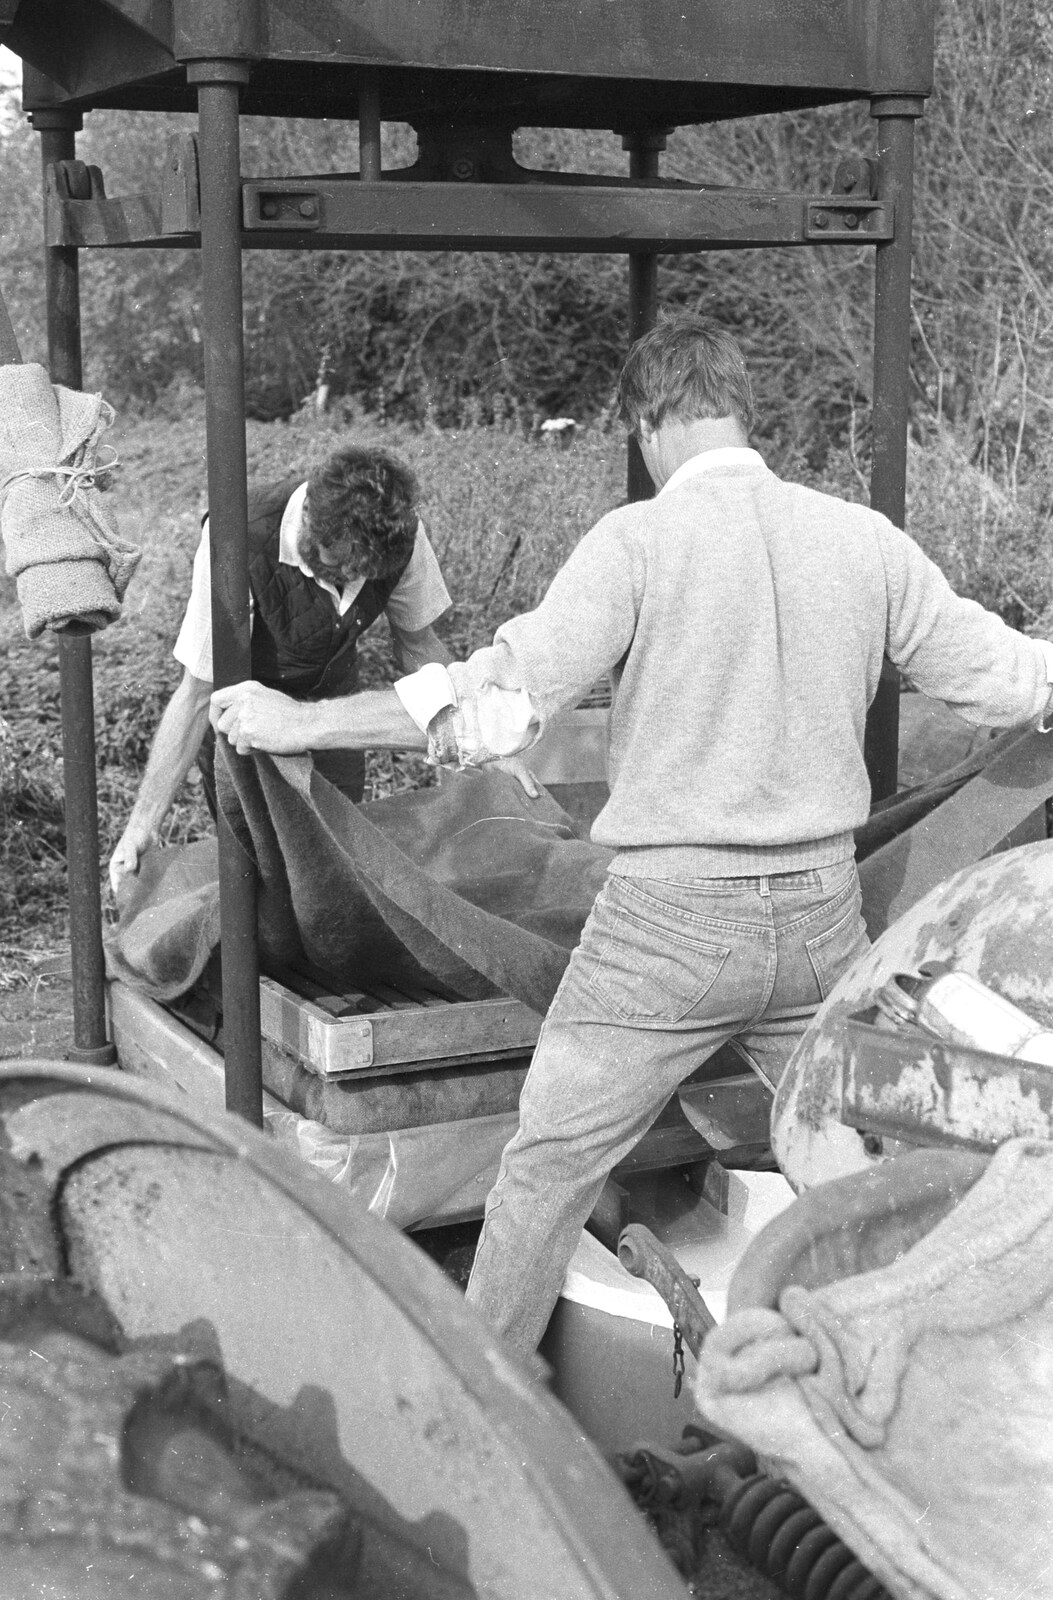 Geoff lays down another layer of muslin from Cider Making in Black and White, Stuston, Suffolk - 11th October 1992